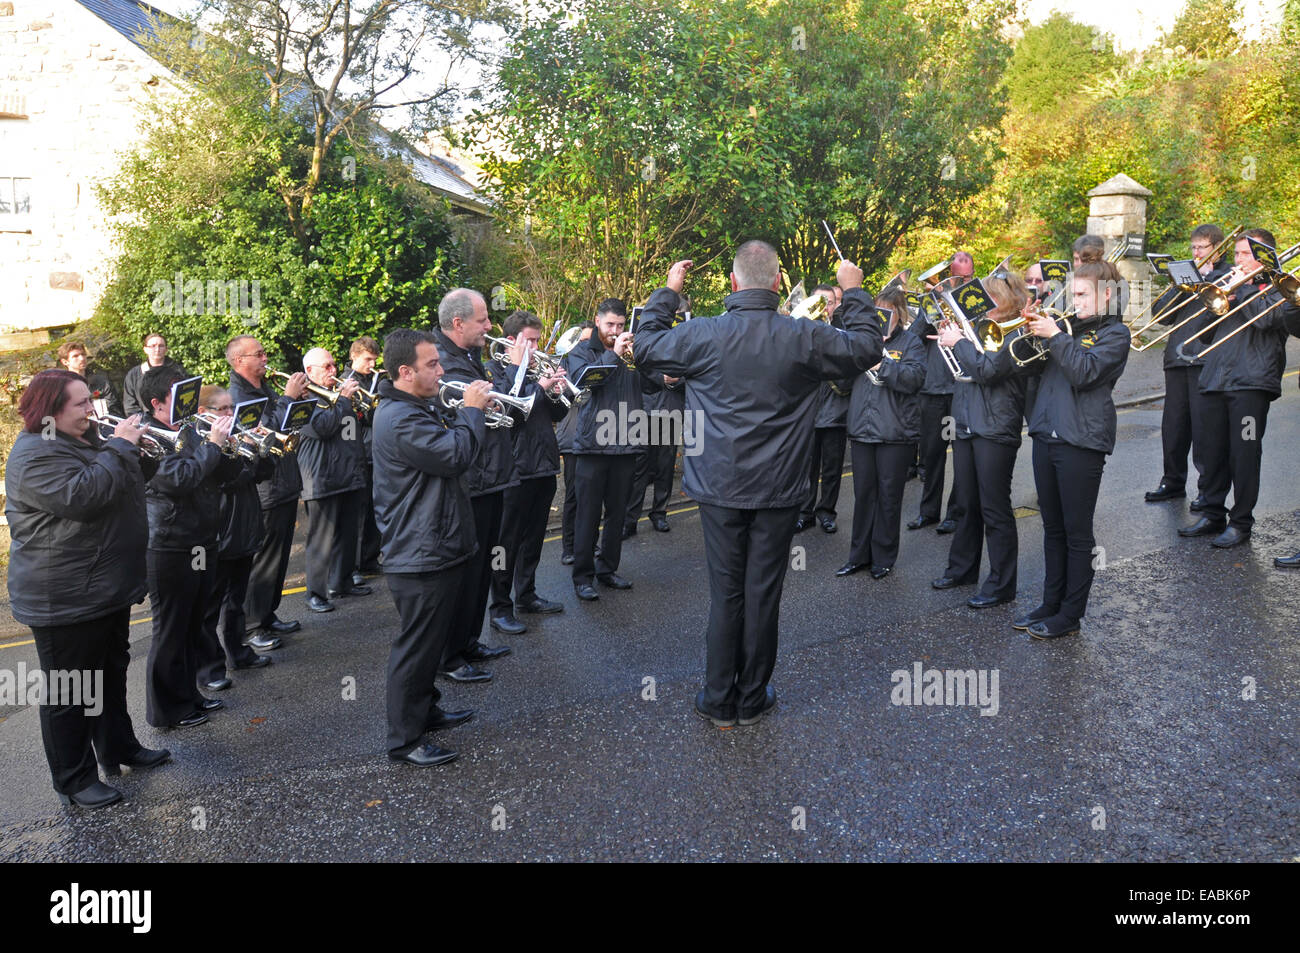 The Pendennis Brass band play on the hill outside St Gluvias church in Penryn Cornwall UK on Remembrance Sunday Stock Photo